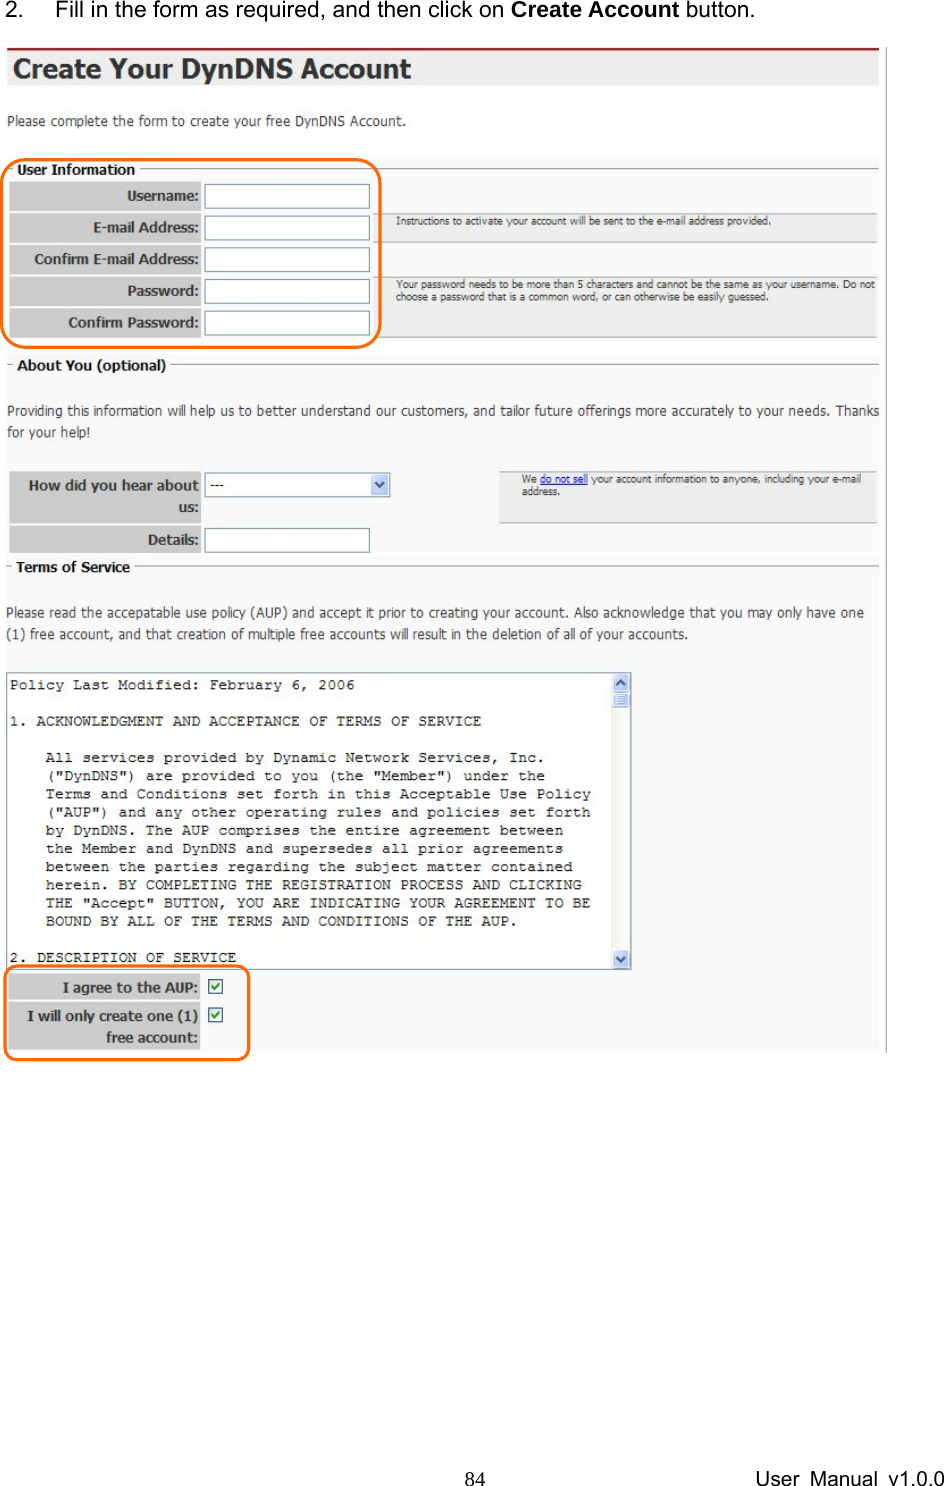                 User Manual v1.0.0 842.  Fill in the form as required, and then click on Create Account button. 